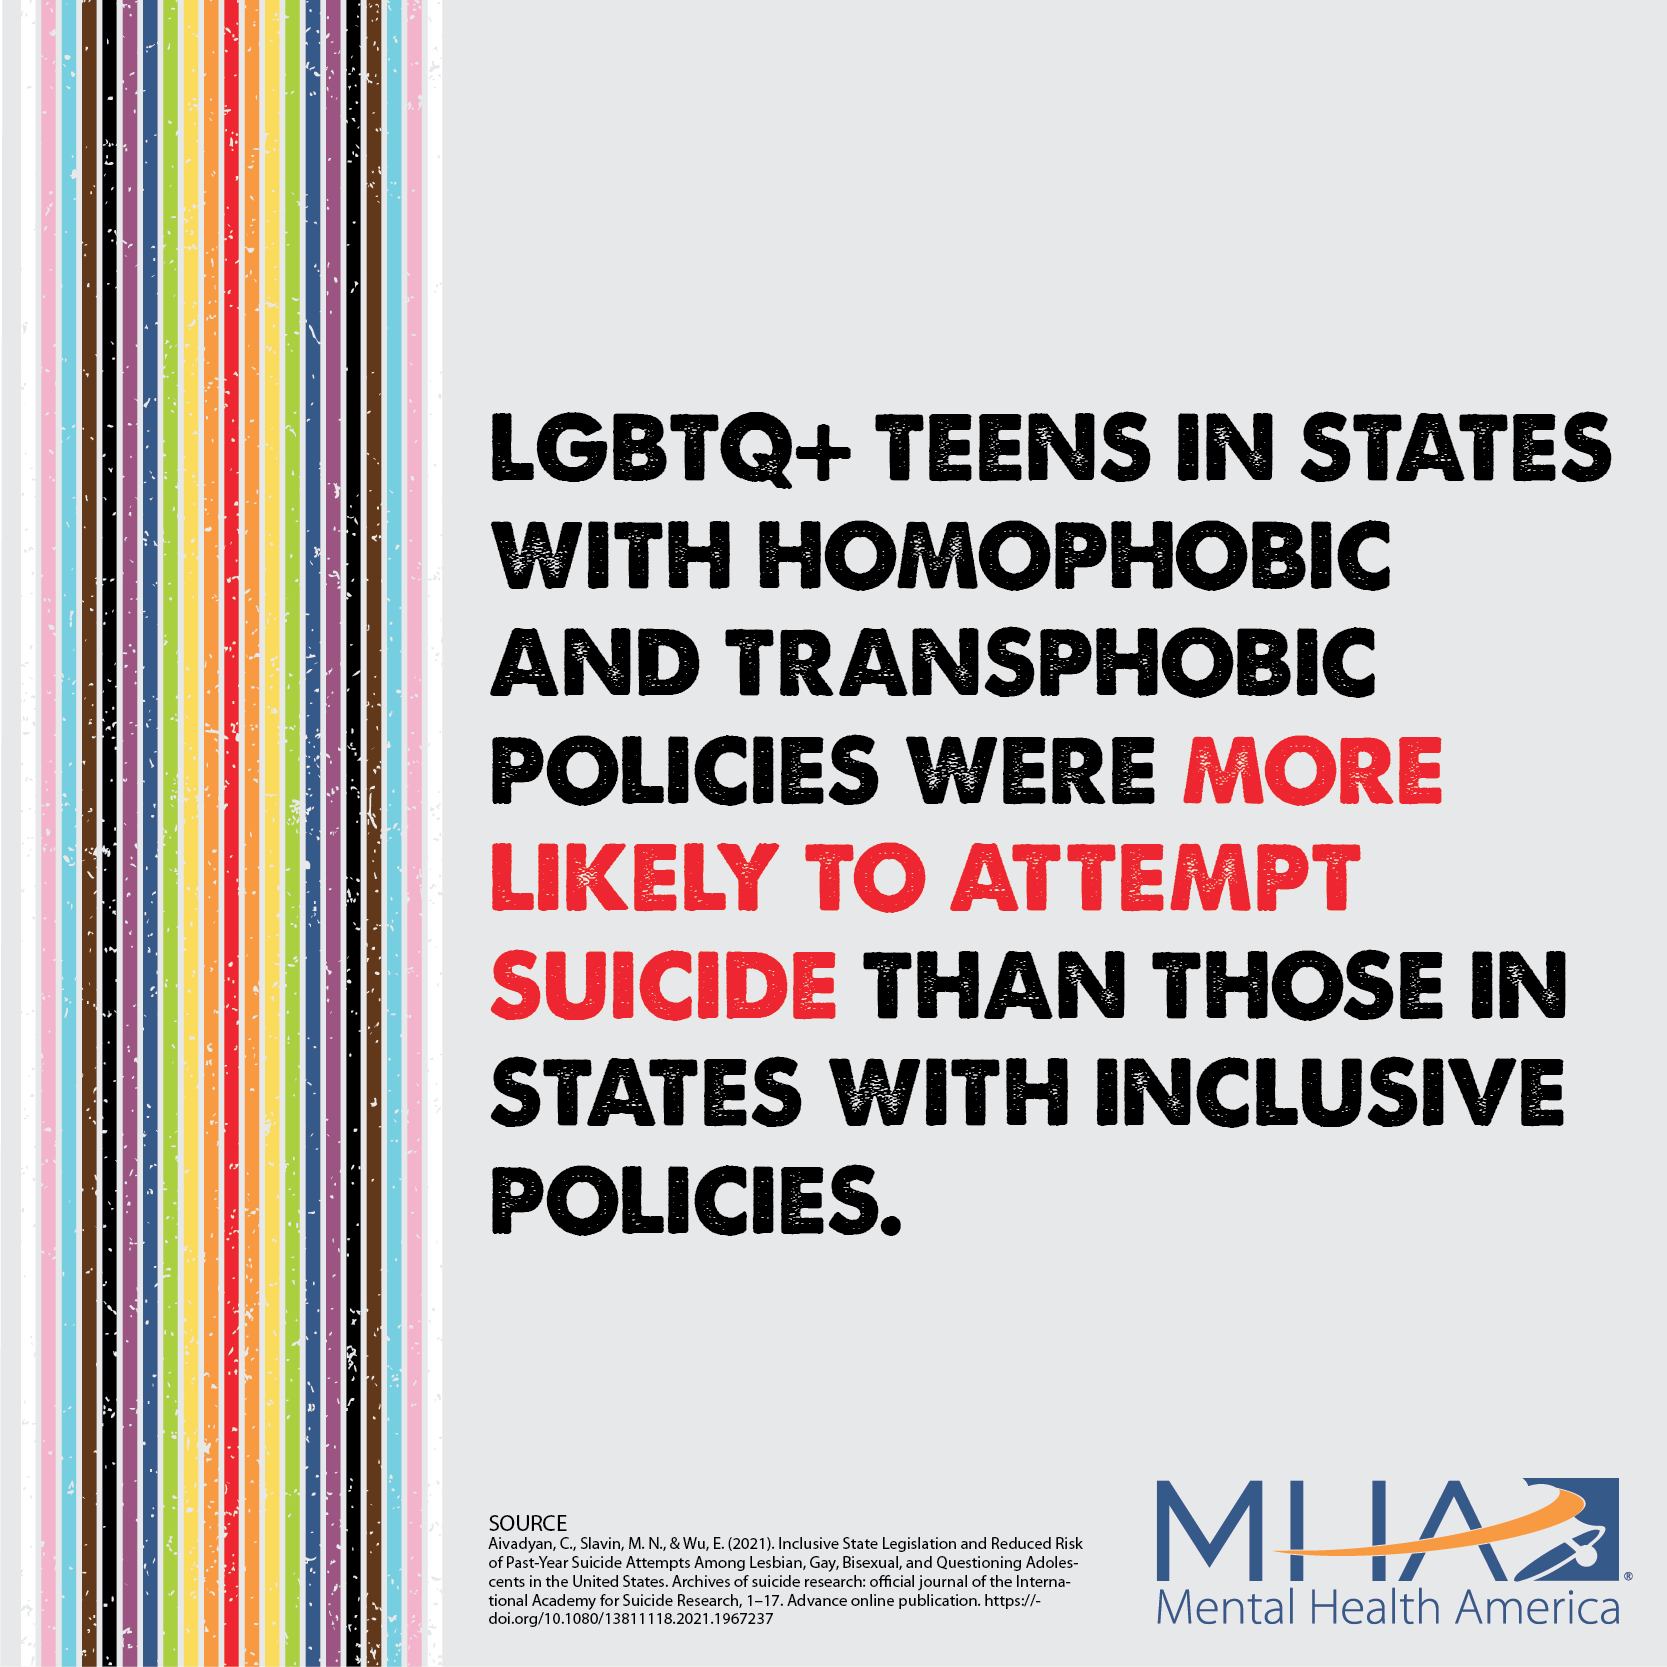 LGBTQ+ teens in states with homophobic and transphobic policies were more likely to attempt suicide than those in states with inclusive policies.